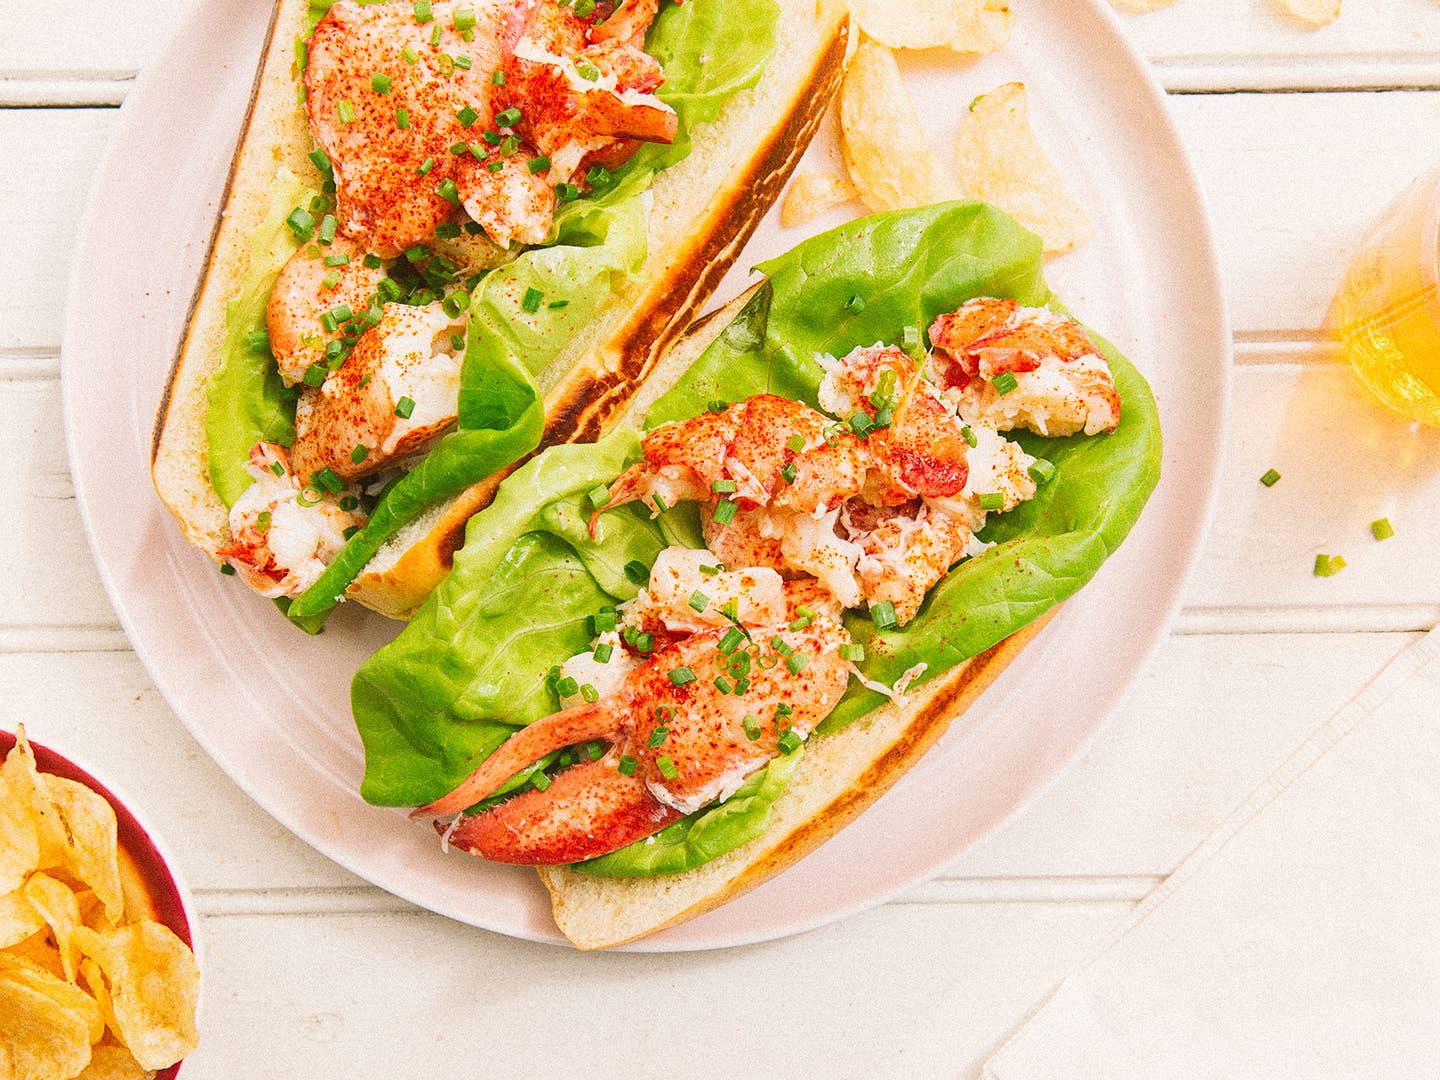 Summer and Lobster Are the Perfect Pairing